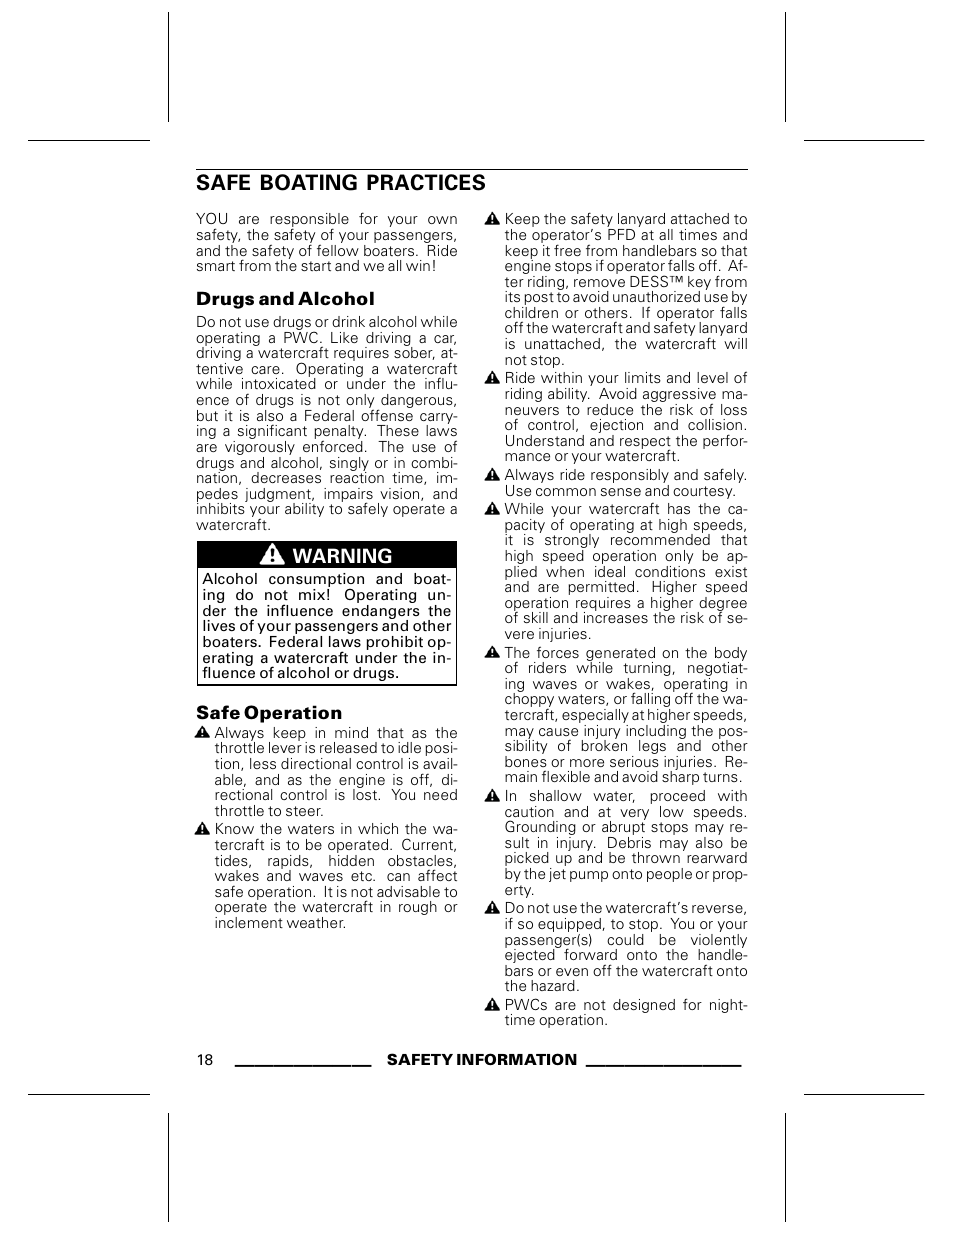 Safe boating practices, Drugs and alcohol, Safe operation | Ski-Doo WAKE Series User Manual | Page 20 / 148